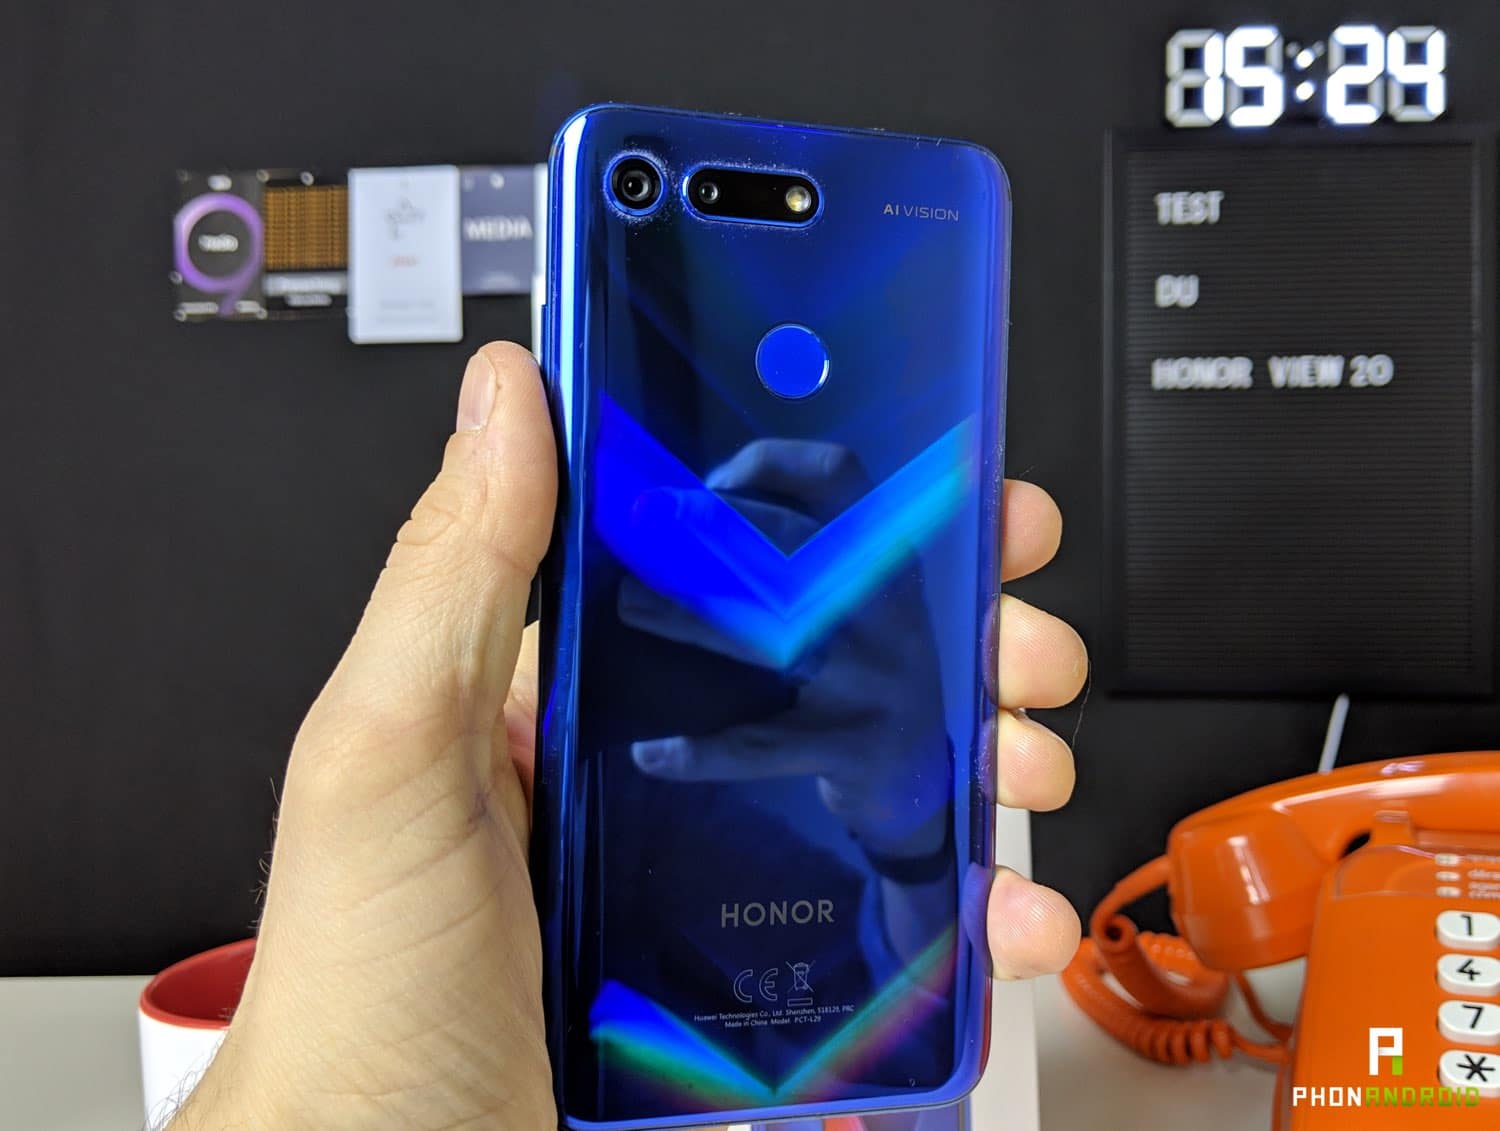 test honor view 20 prix